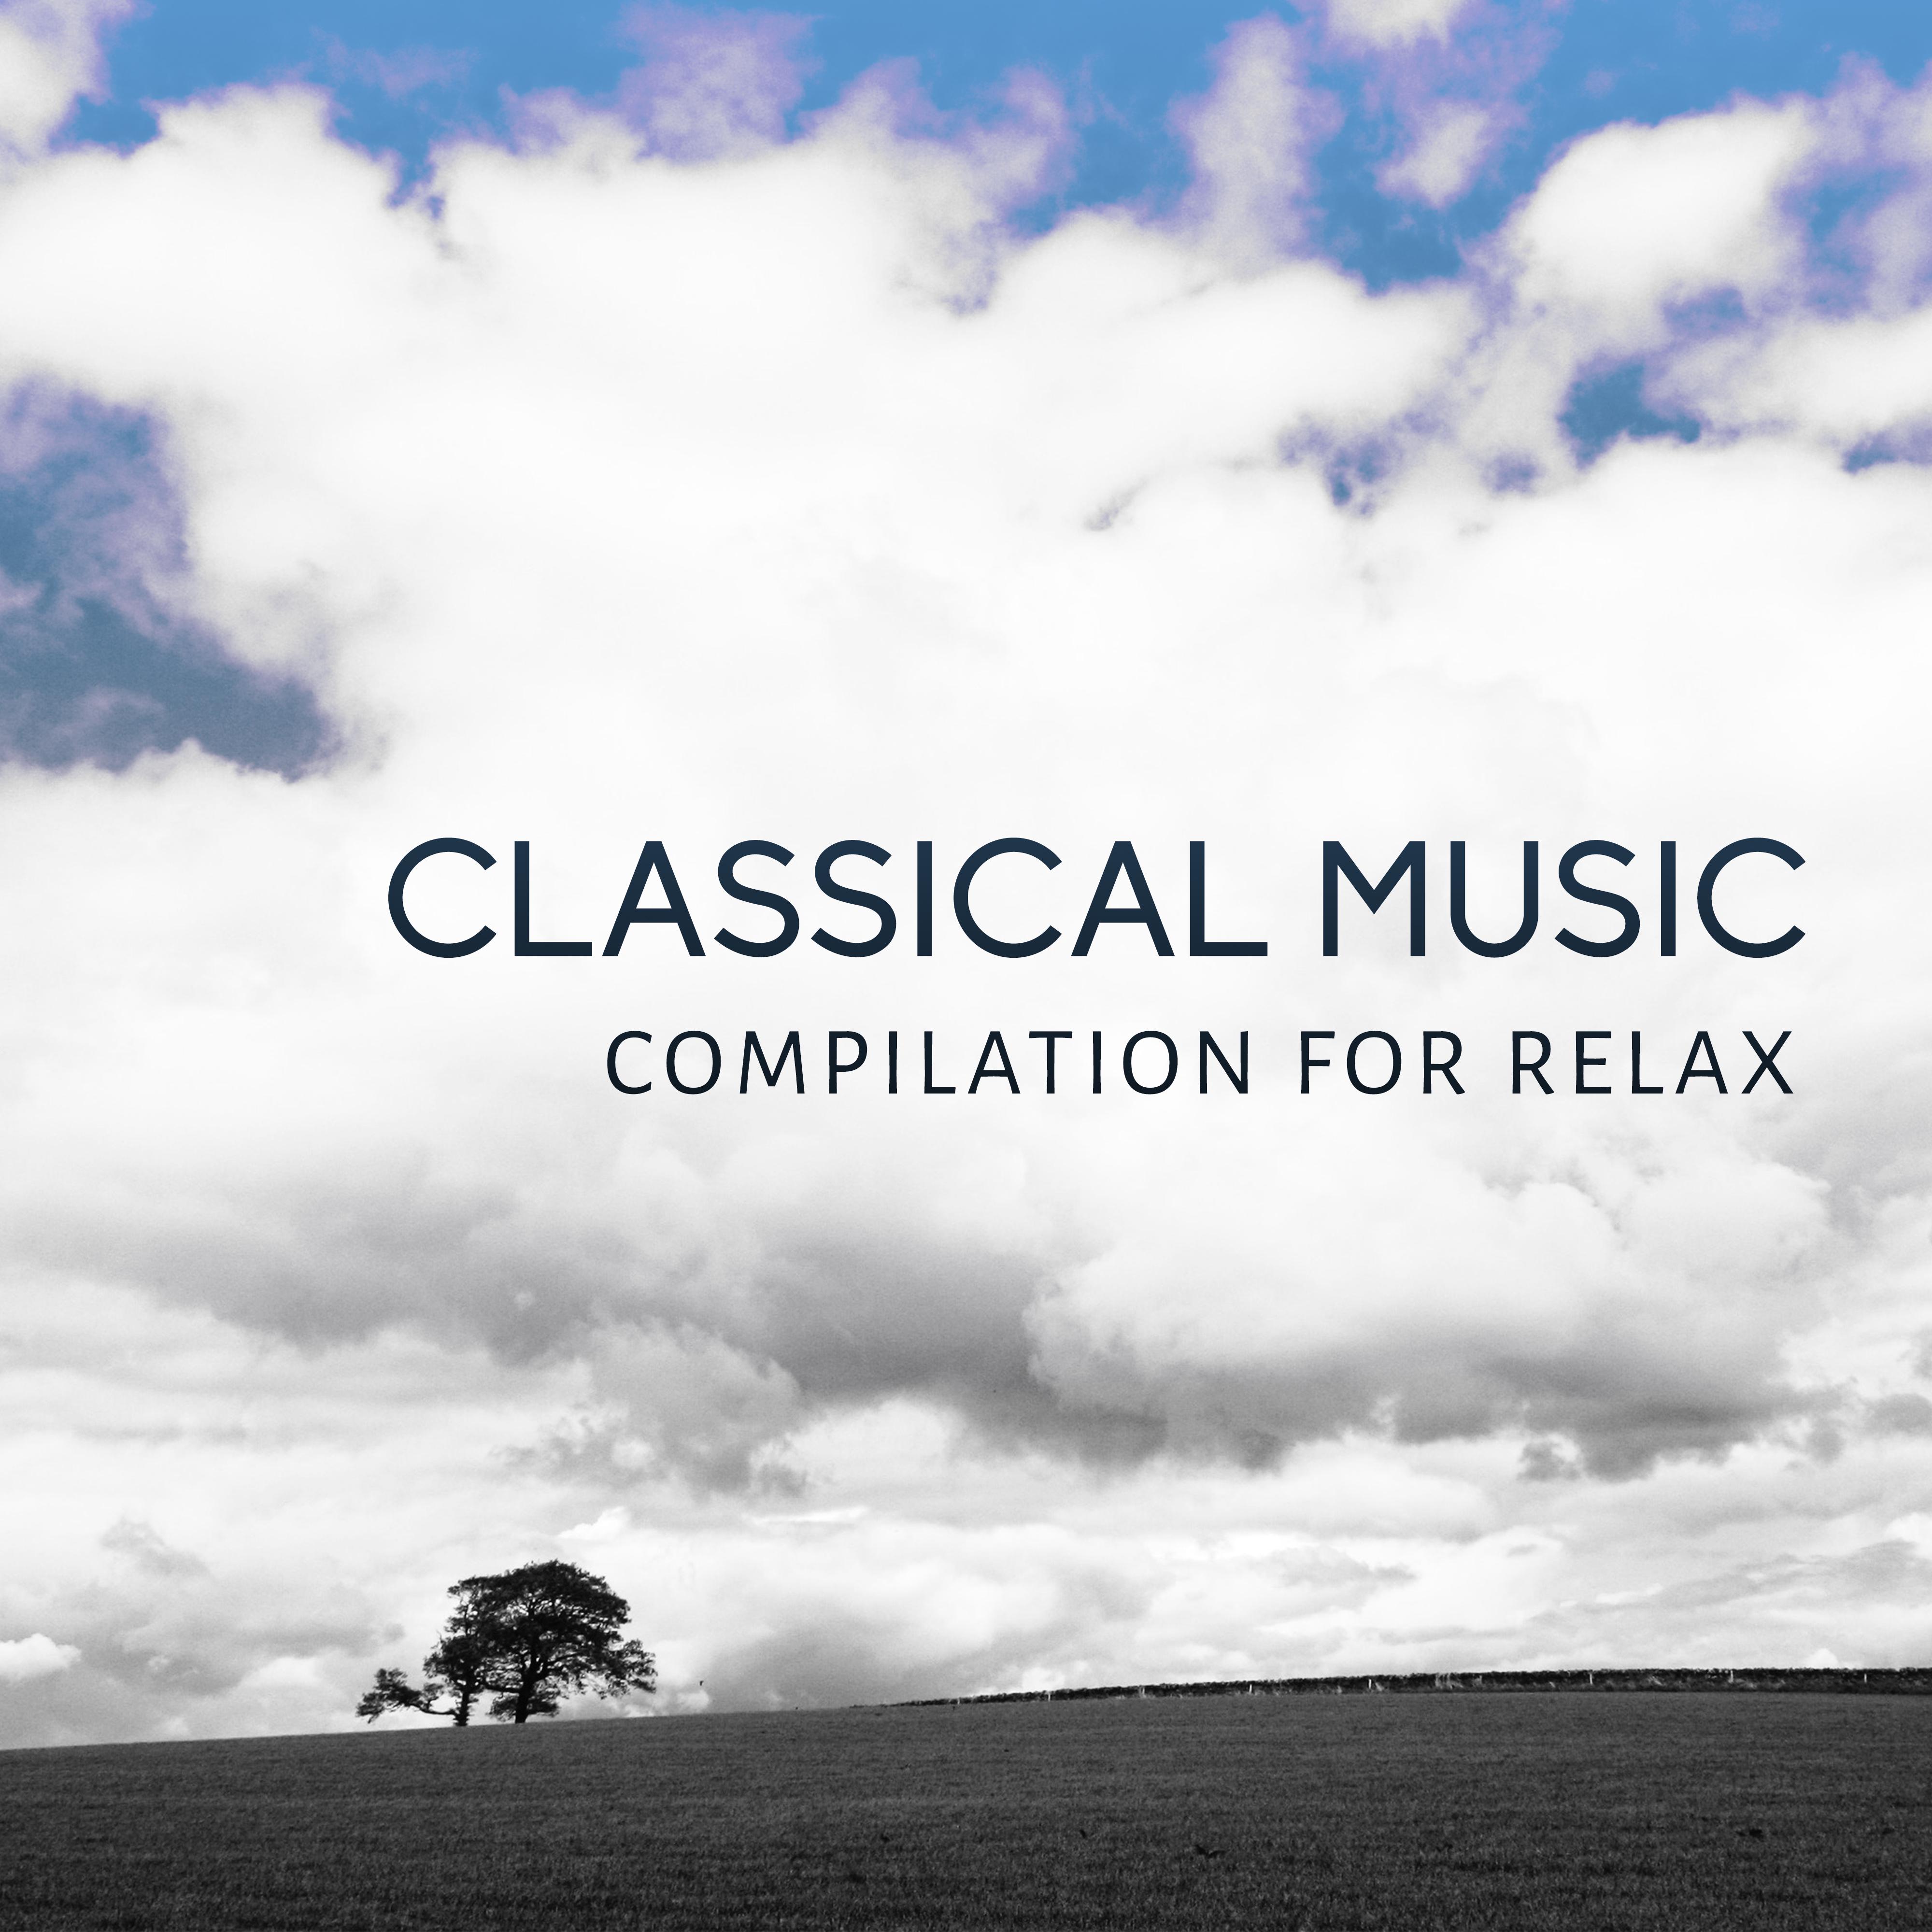 Classical Music Compilation for Relax